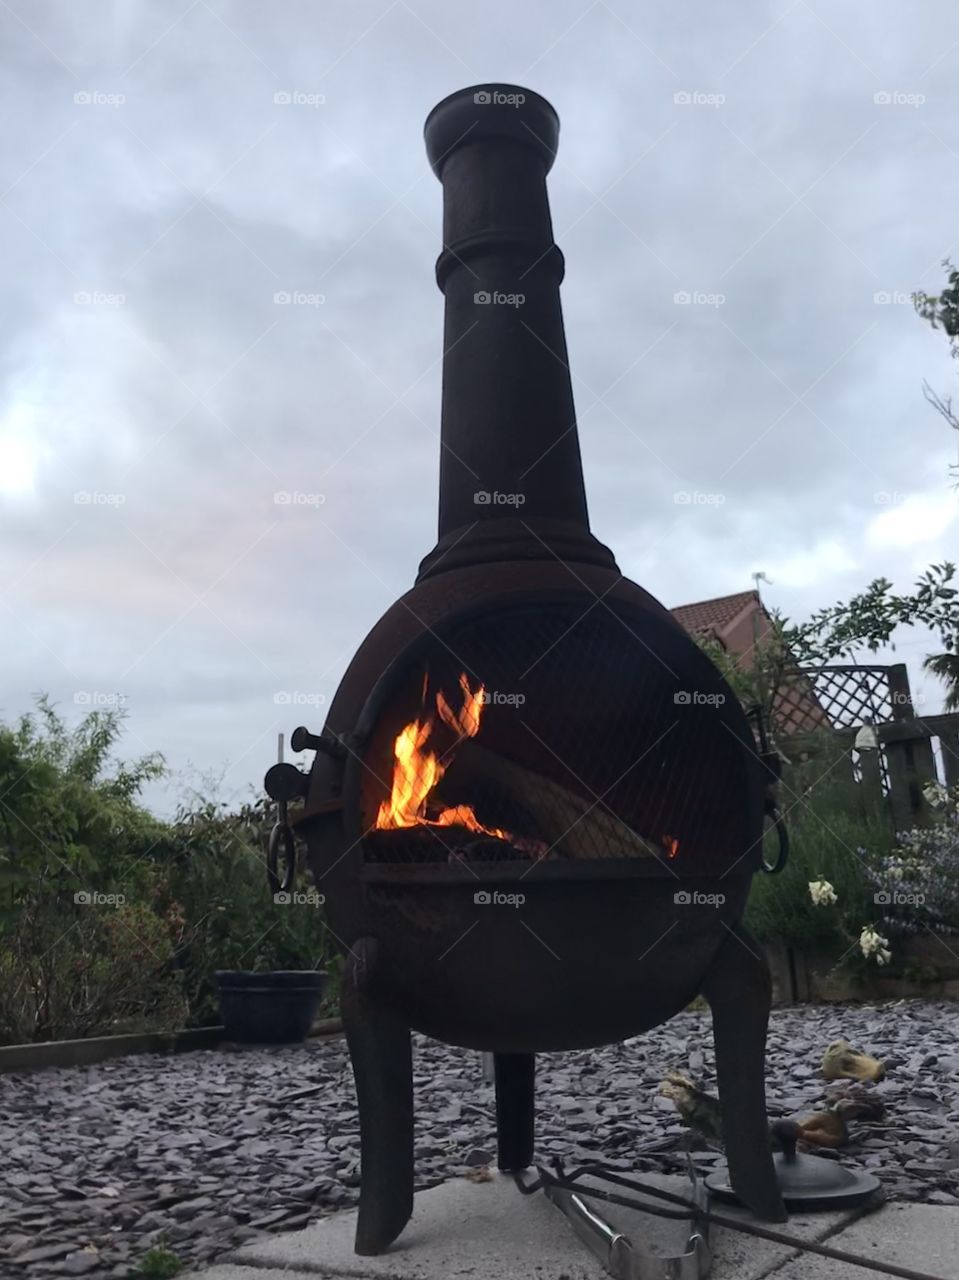 Lit chiminea against a cloudy backdrop. 